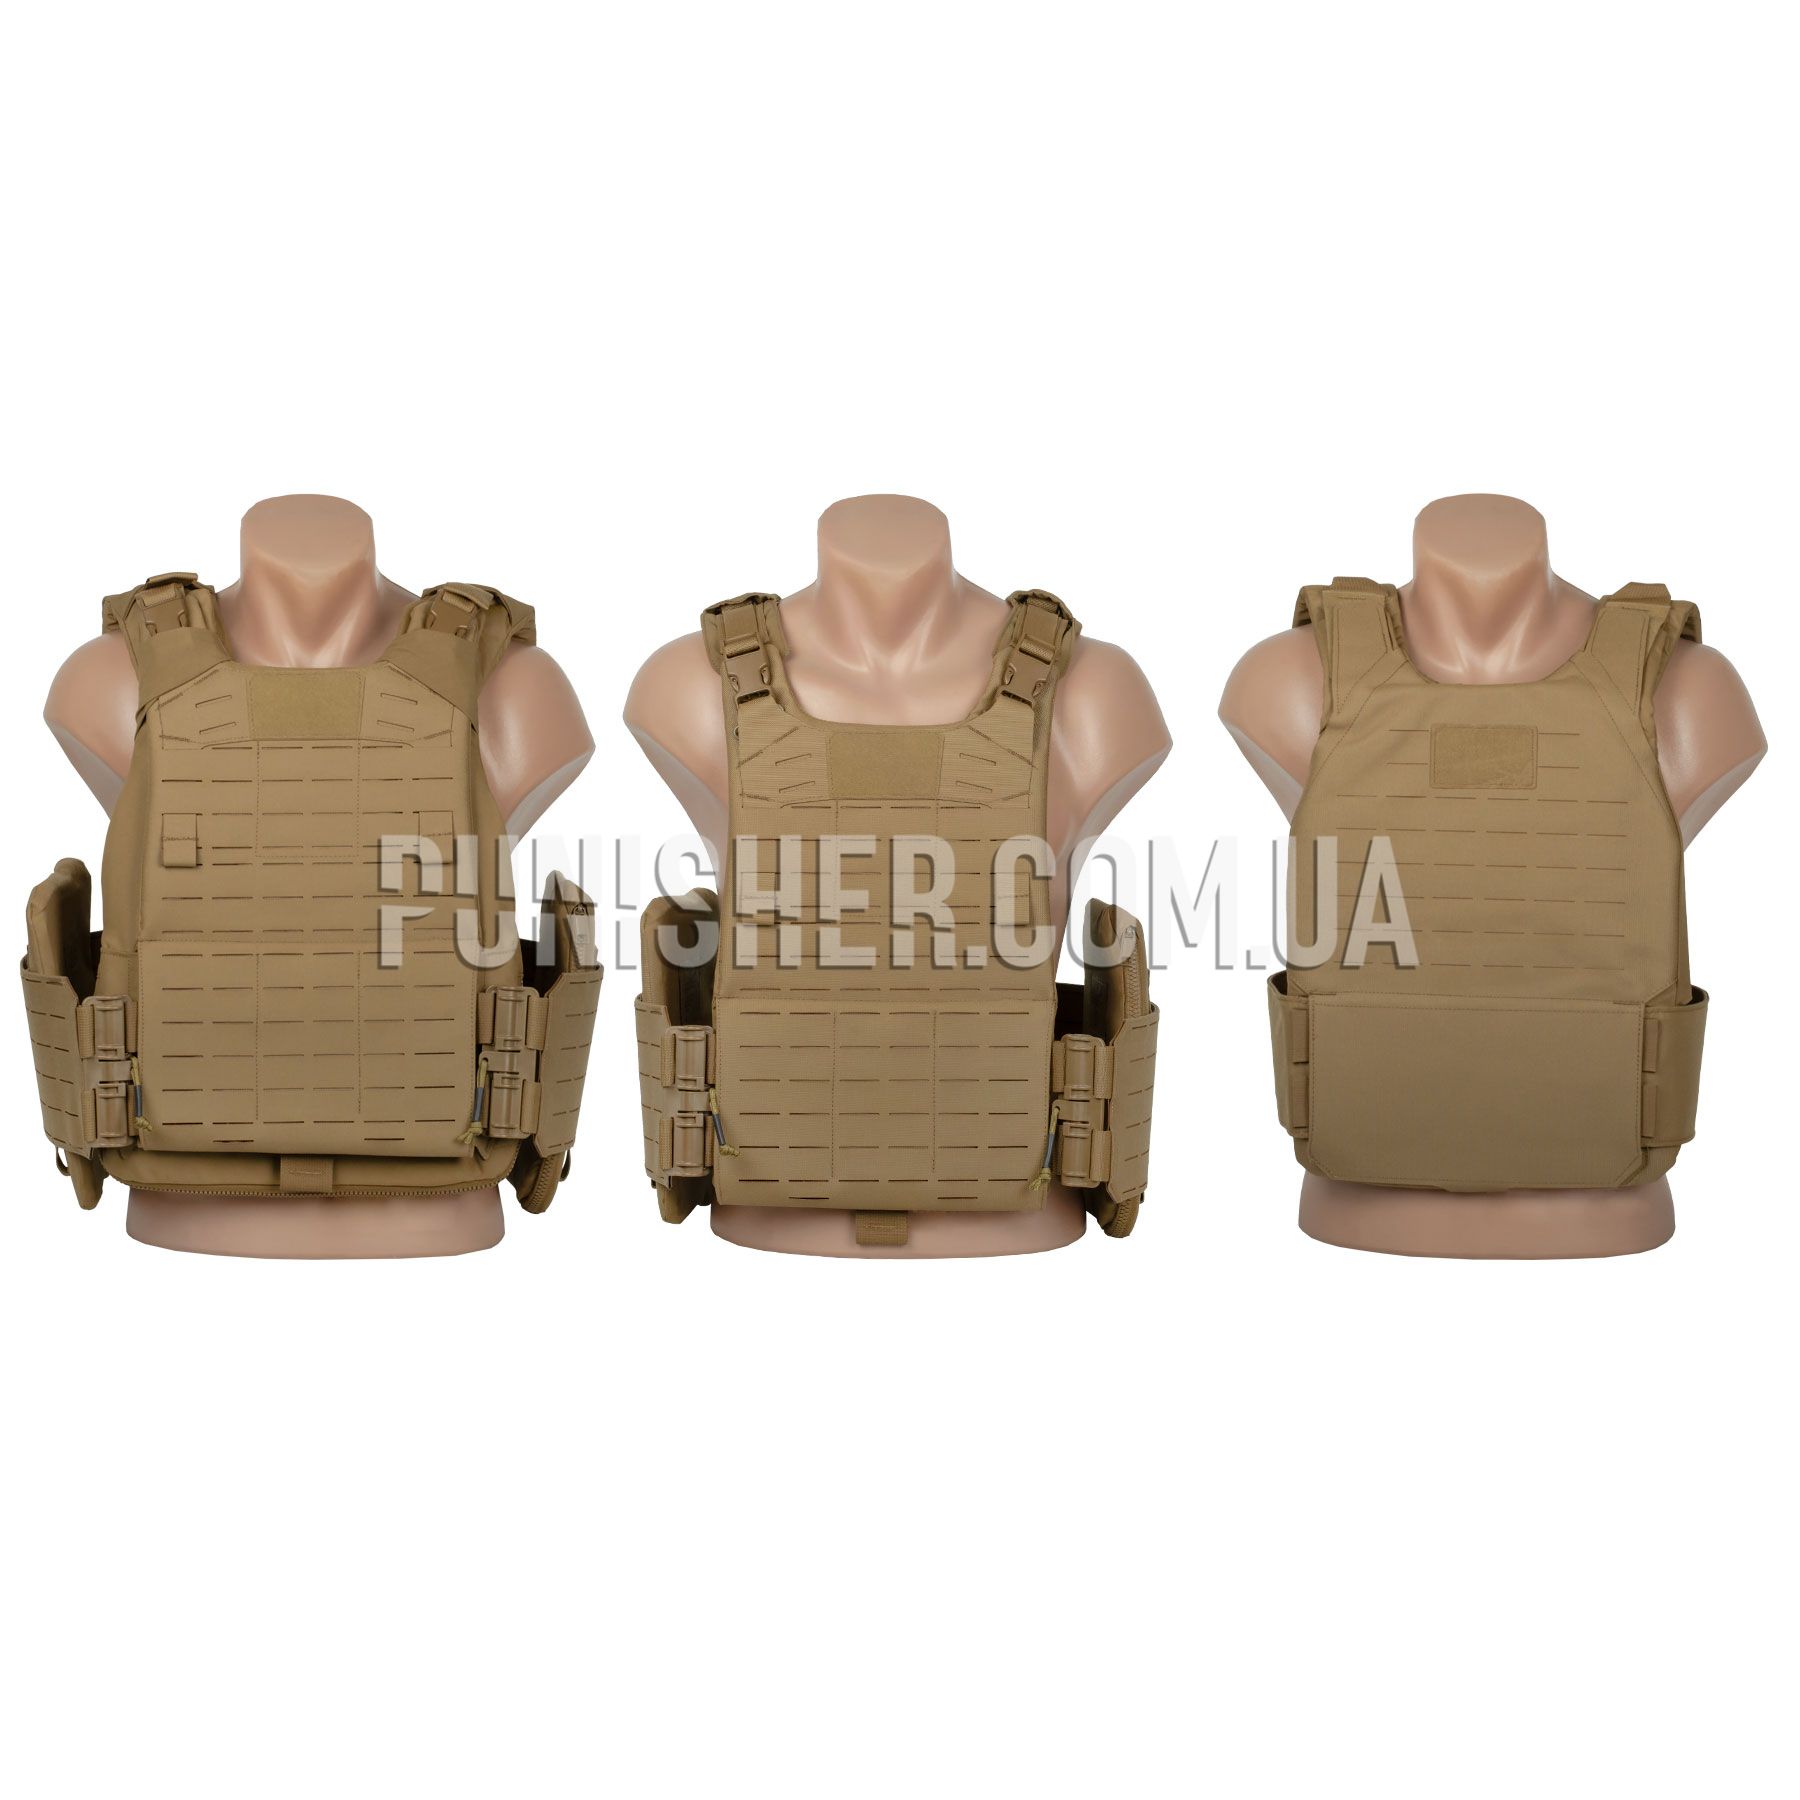 USMC Marine Corps Plate Carrier Gen III Complete System Coyote 